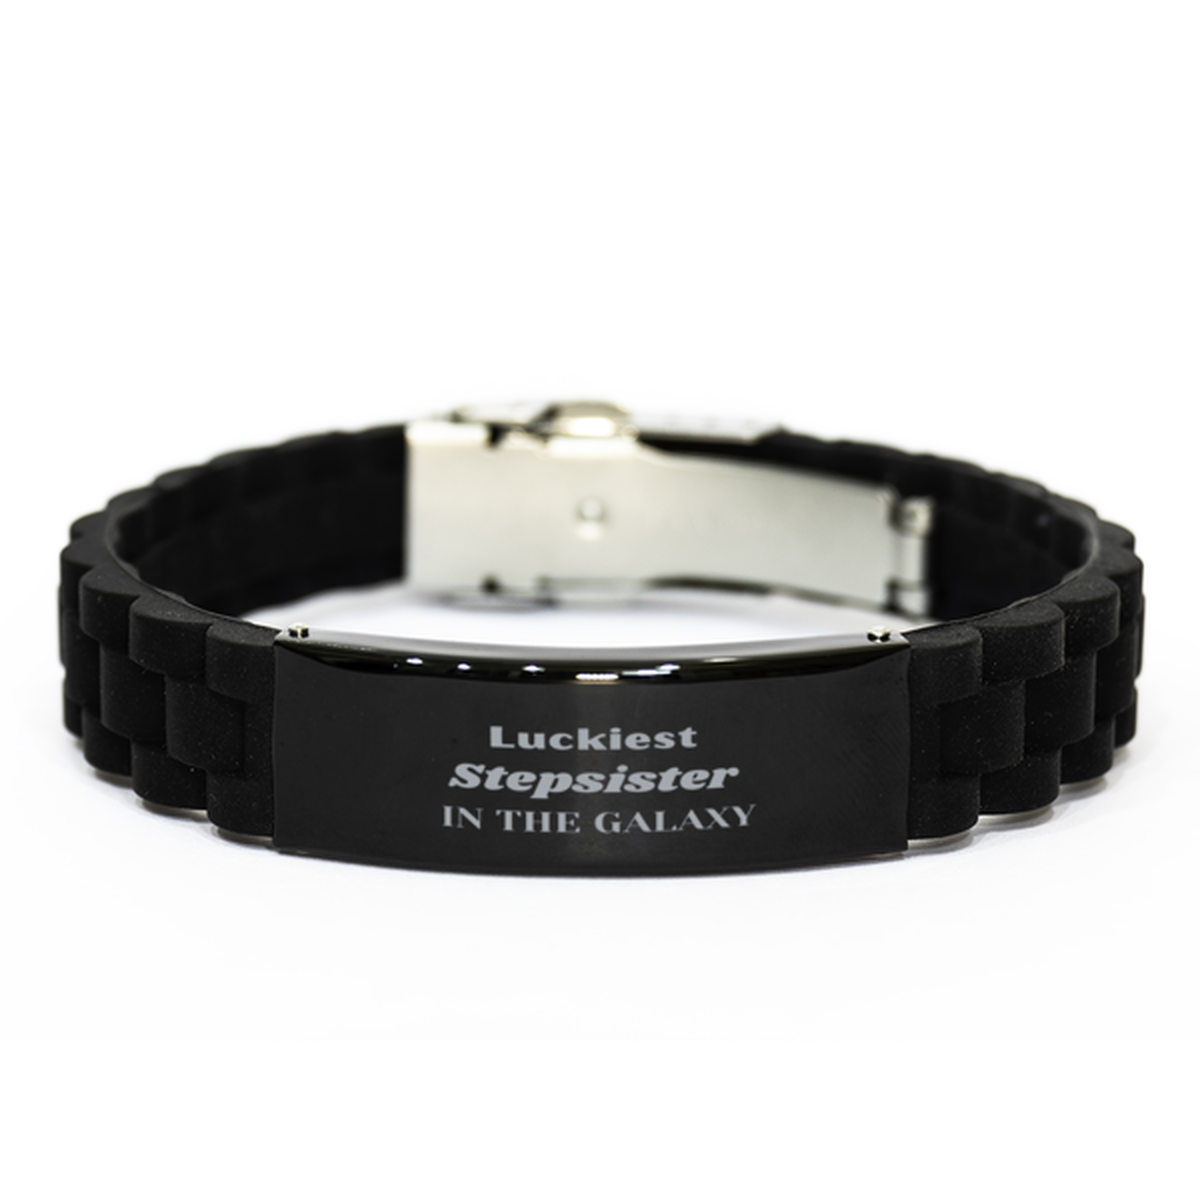 Luckiest Stepsister in the Galaxy, To My Stepsister Engraved Gifts, Christmas Stepsister Black Glidelock Clasp Bracelet Gifts, X-mas Birthday Unique Gifts For Stepsister Men Women